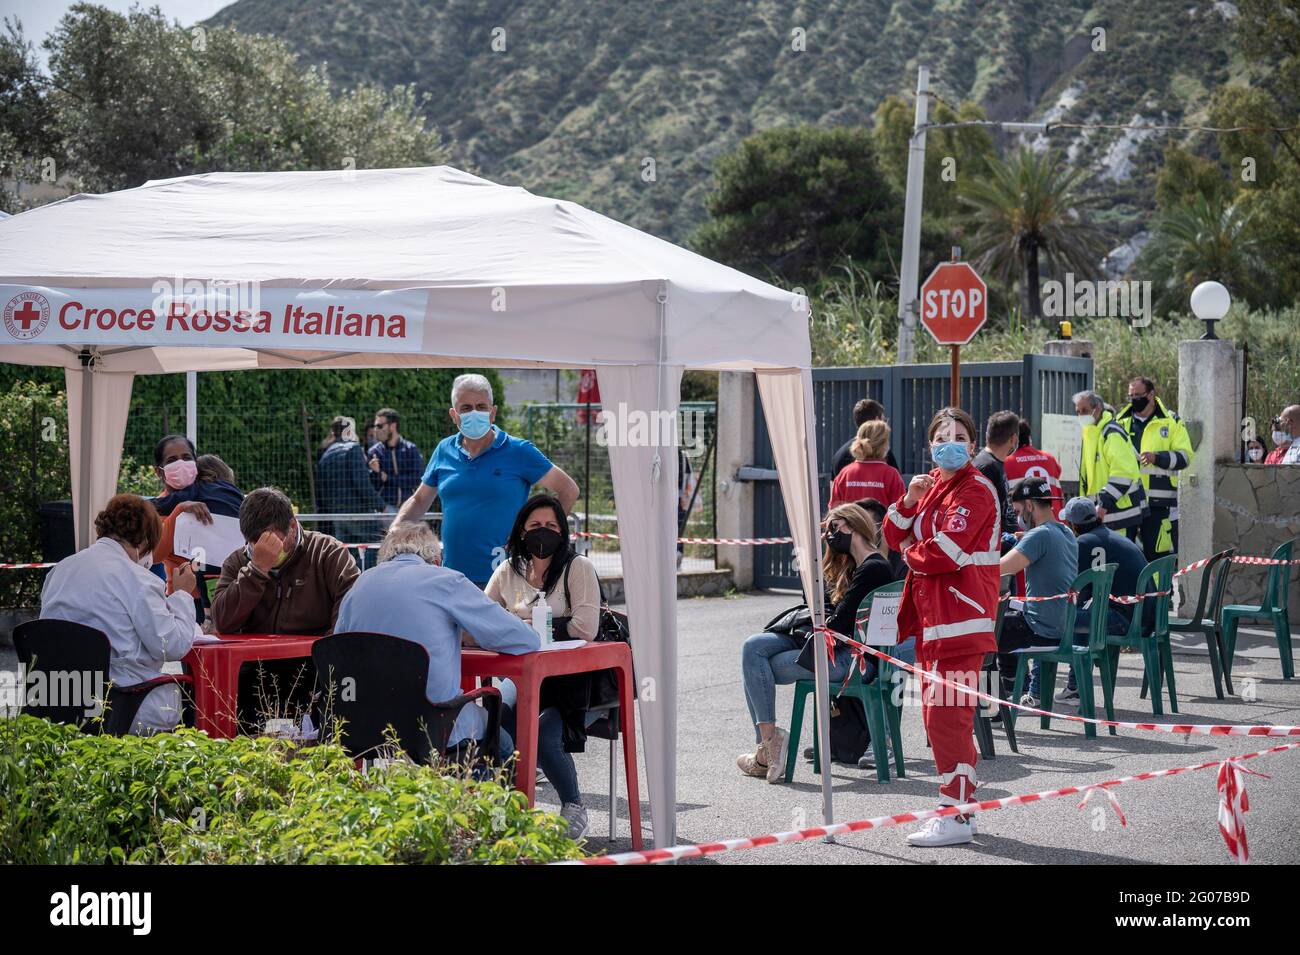 Vulcano, Sicily, Italy. 14th May, 2021. People seen talking with doctors at the anamnesis point during the mass vaccination in Vulcano.Mass vaccination started in Vulcano island under the guidance of Sicilia Region team, the Special Commissioner for Covid-19 Emergency for Messina Metropolitan Area (Ufficio Commissario Ad Acta per l'Emergenza Covid-19 per l'Area Metropolitana di Messina) and the Red Cross local team. Doses of Moderna and Johnson & Johnson vaccines were administered to residents in order to implement the 'Covid-free islands'' program for the summer. (Credit Image: © Valeri Stock Photo